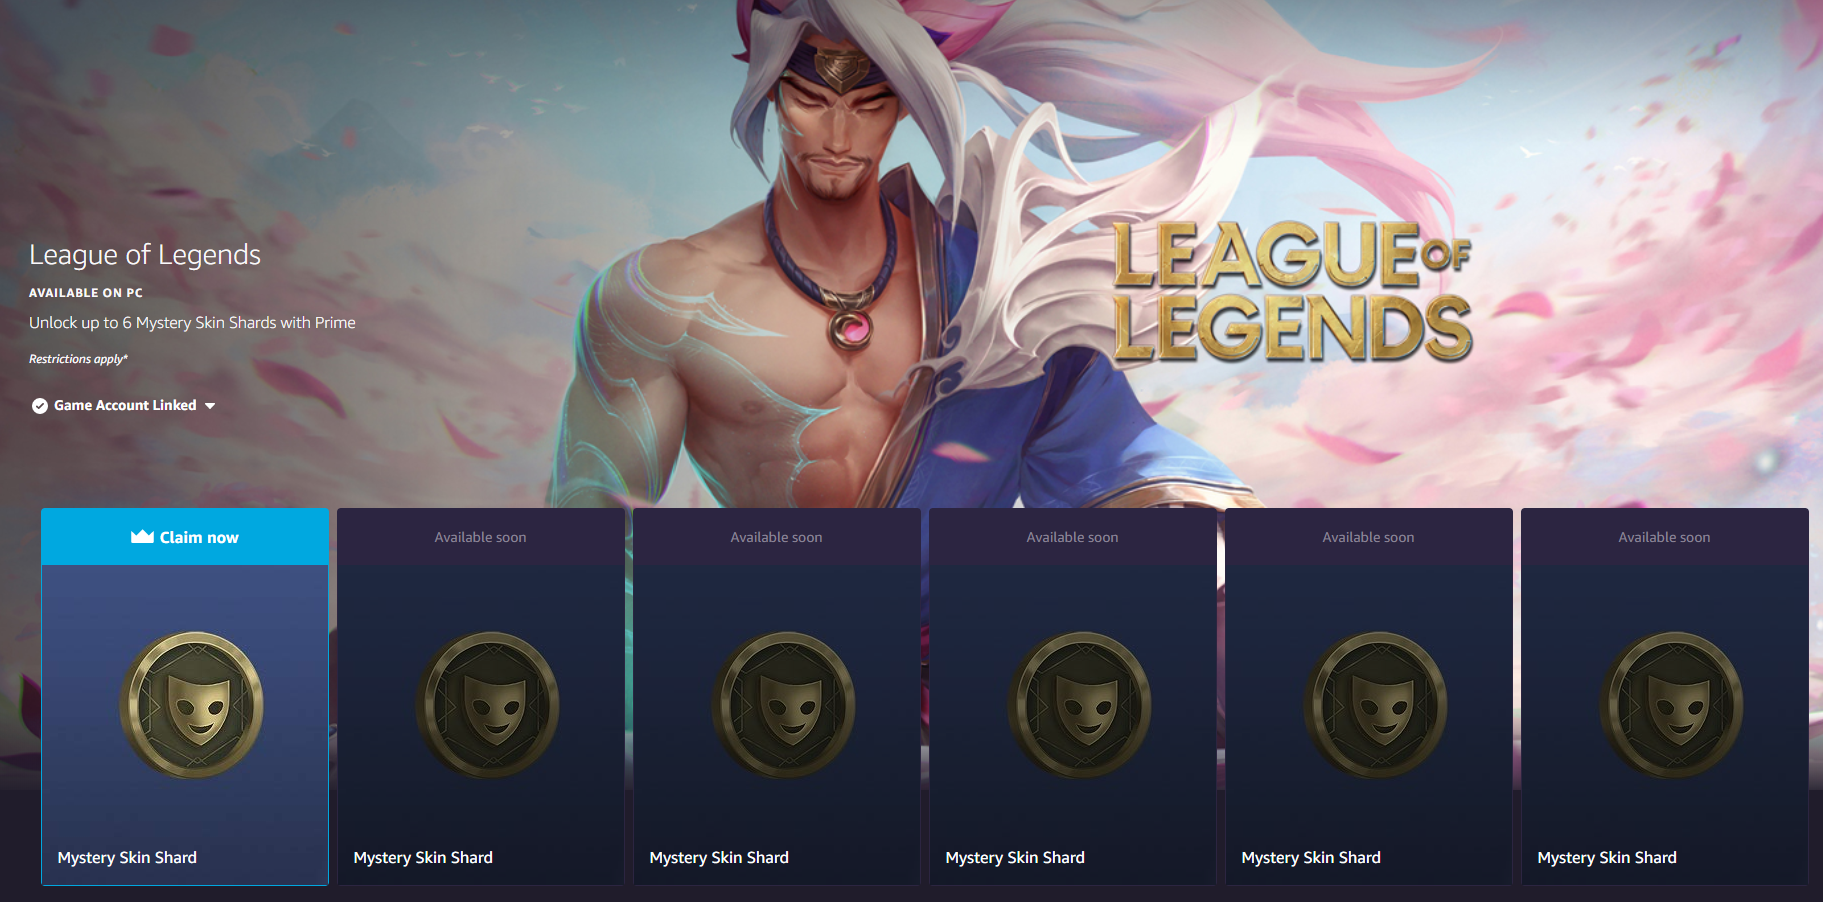 moobeat on X: New Twitch Prime TFT loot is now up!    / X